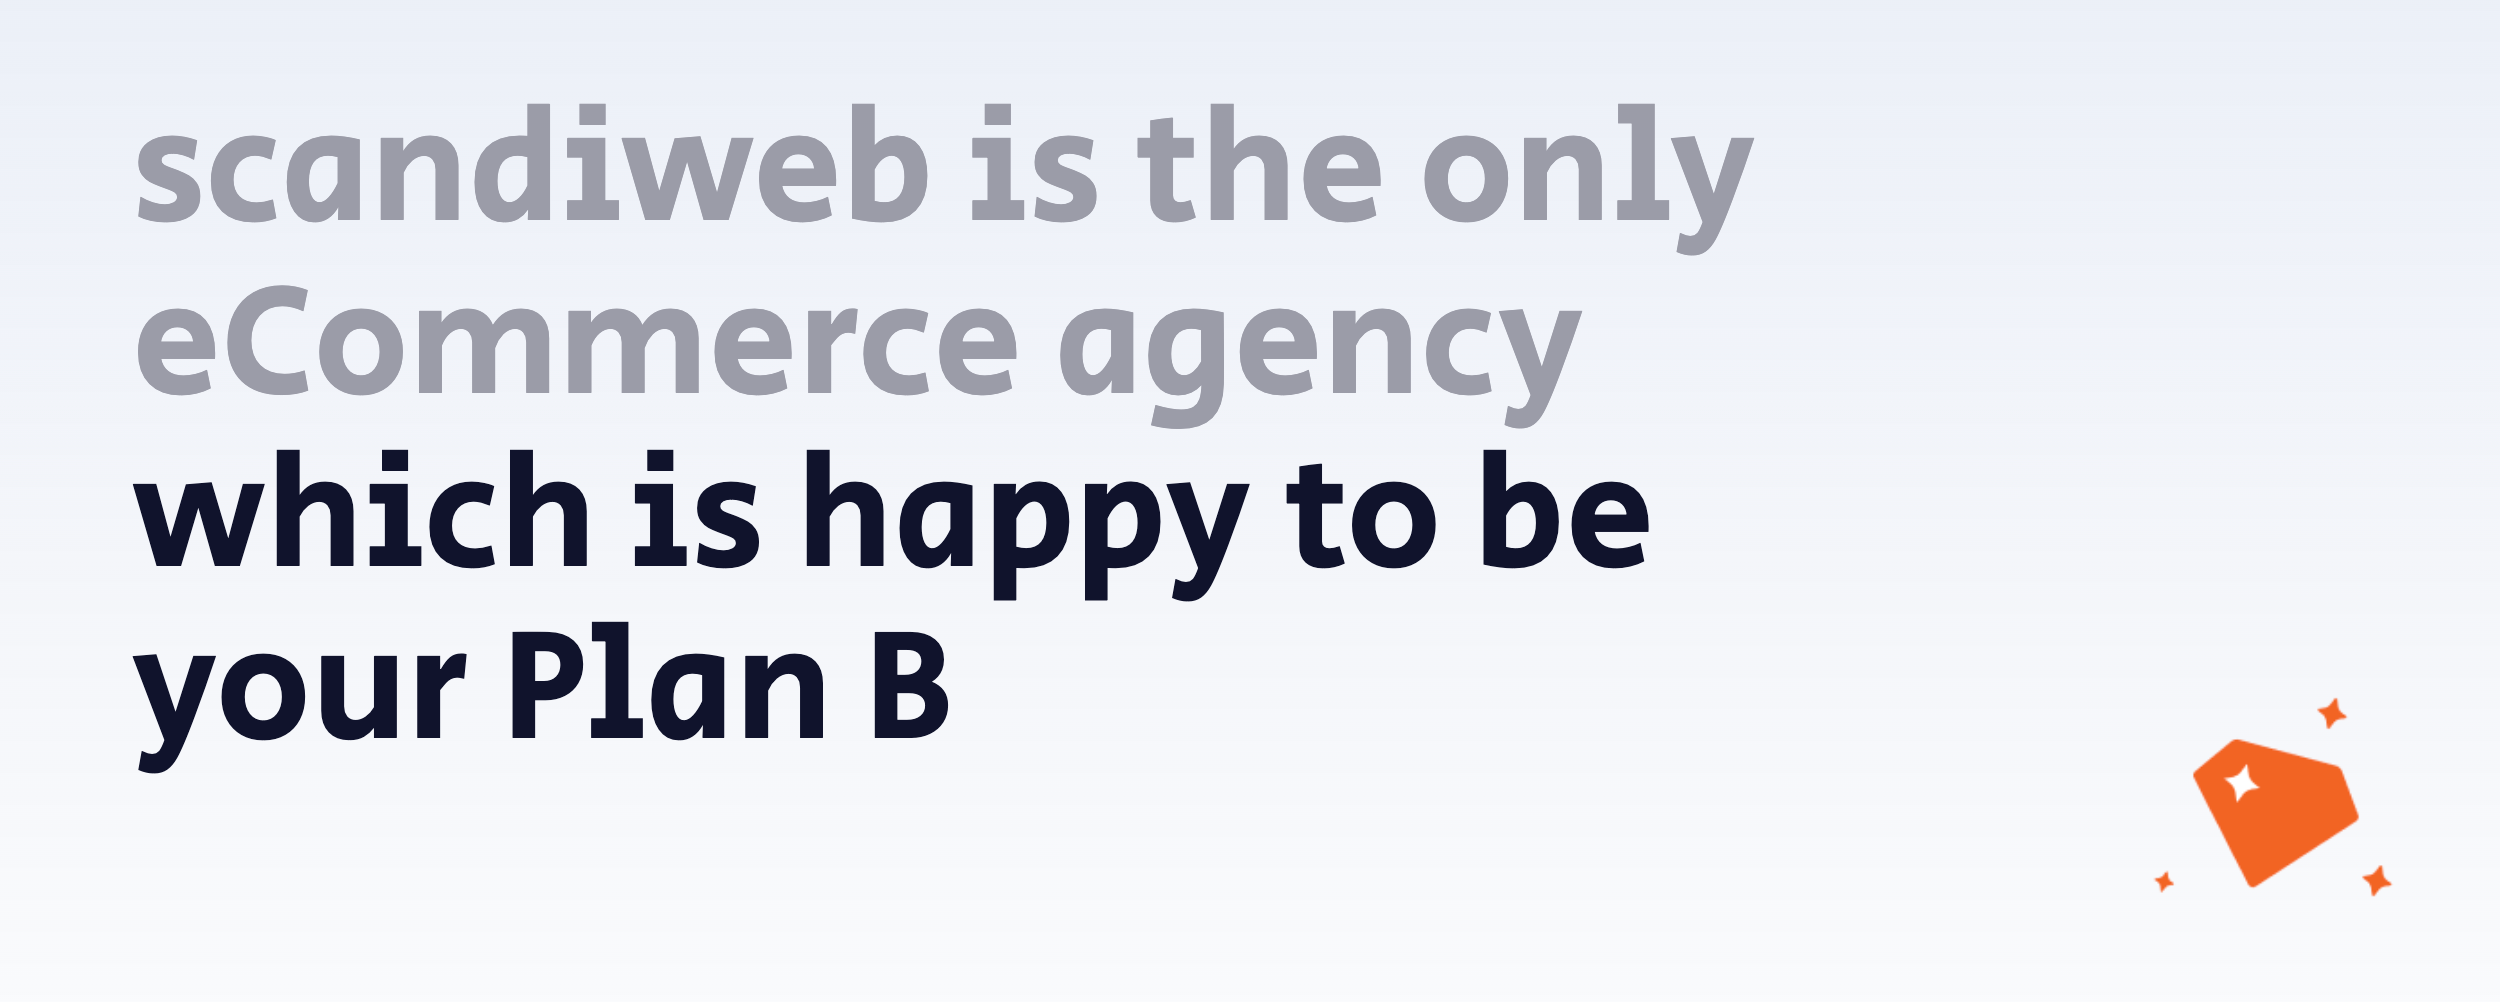 scandiweb is the only eCommerce agency which is happy to be your plan B